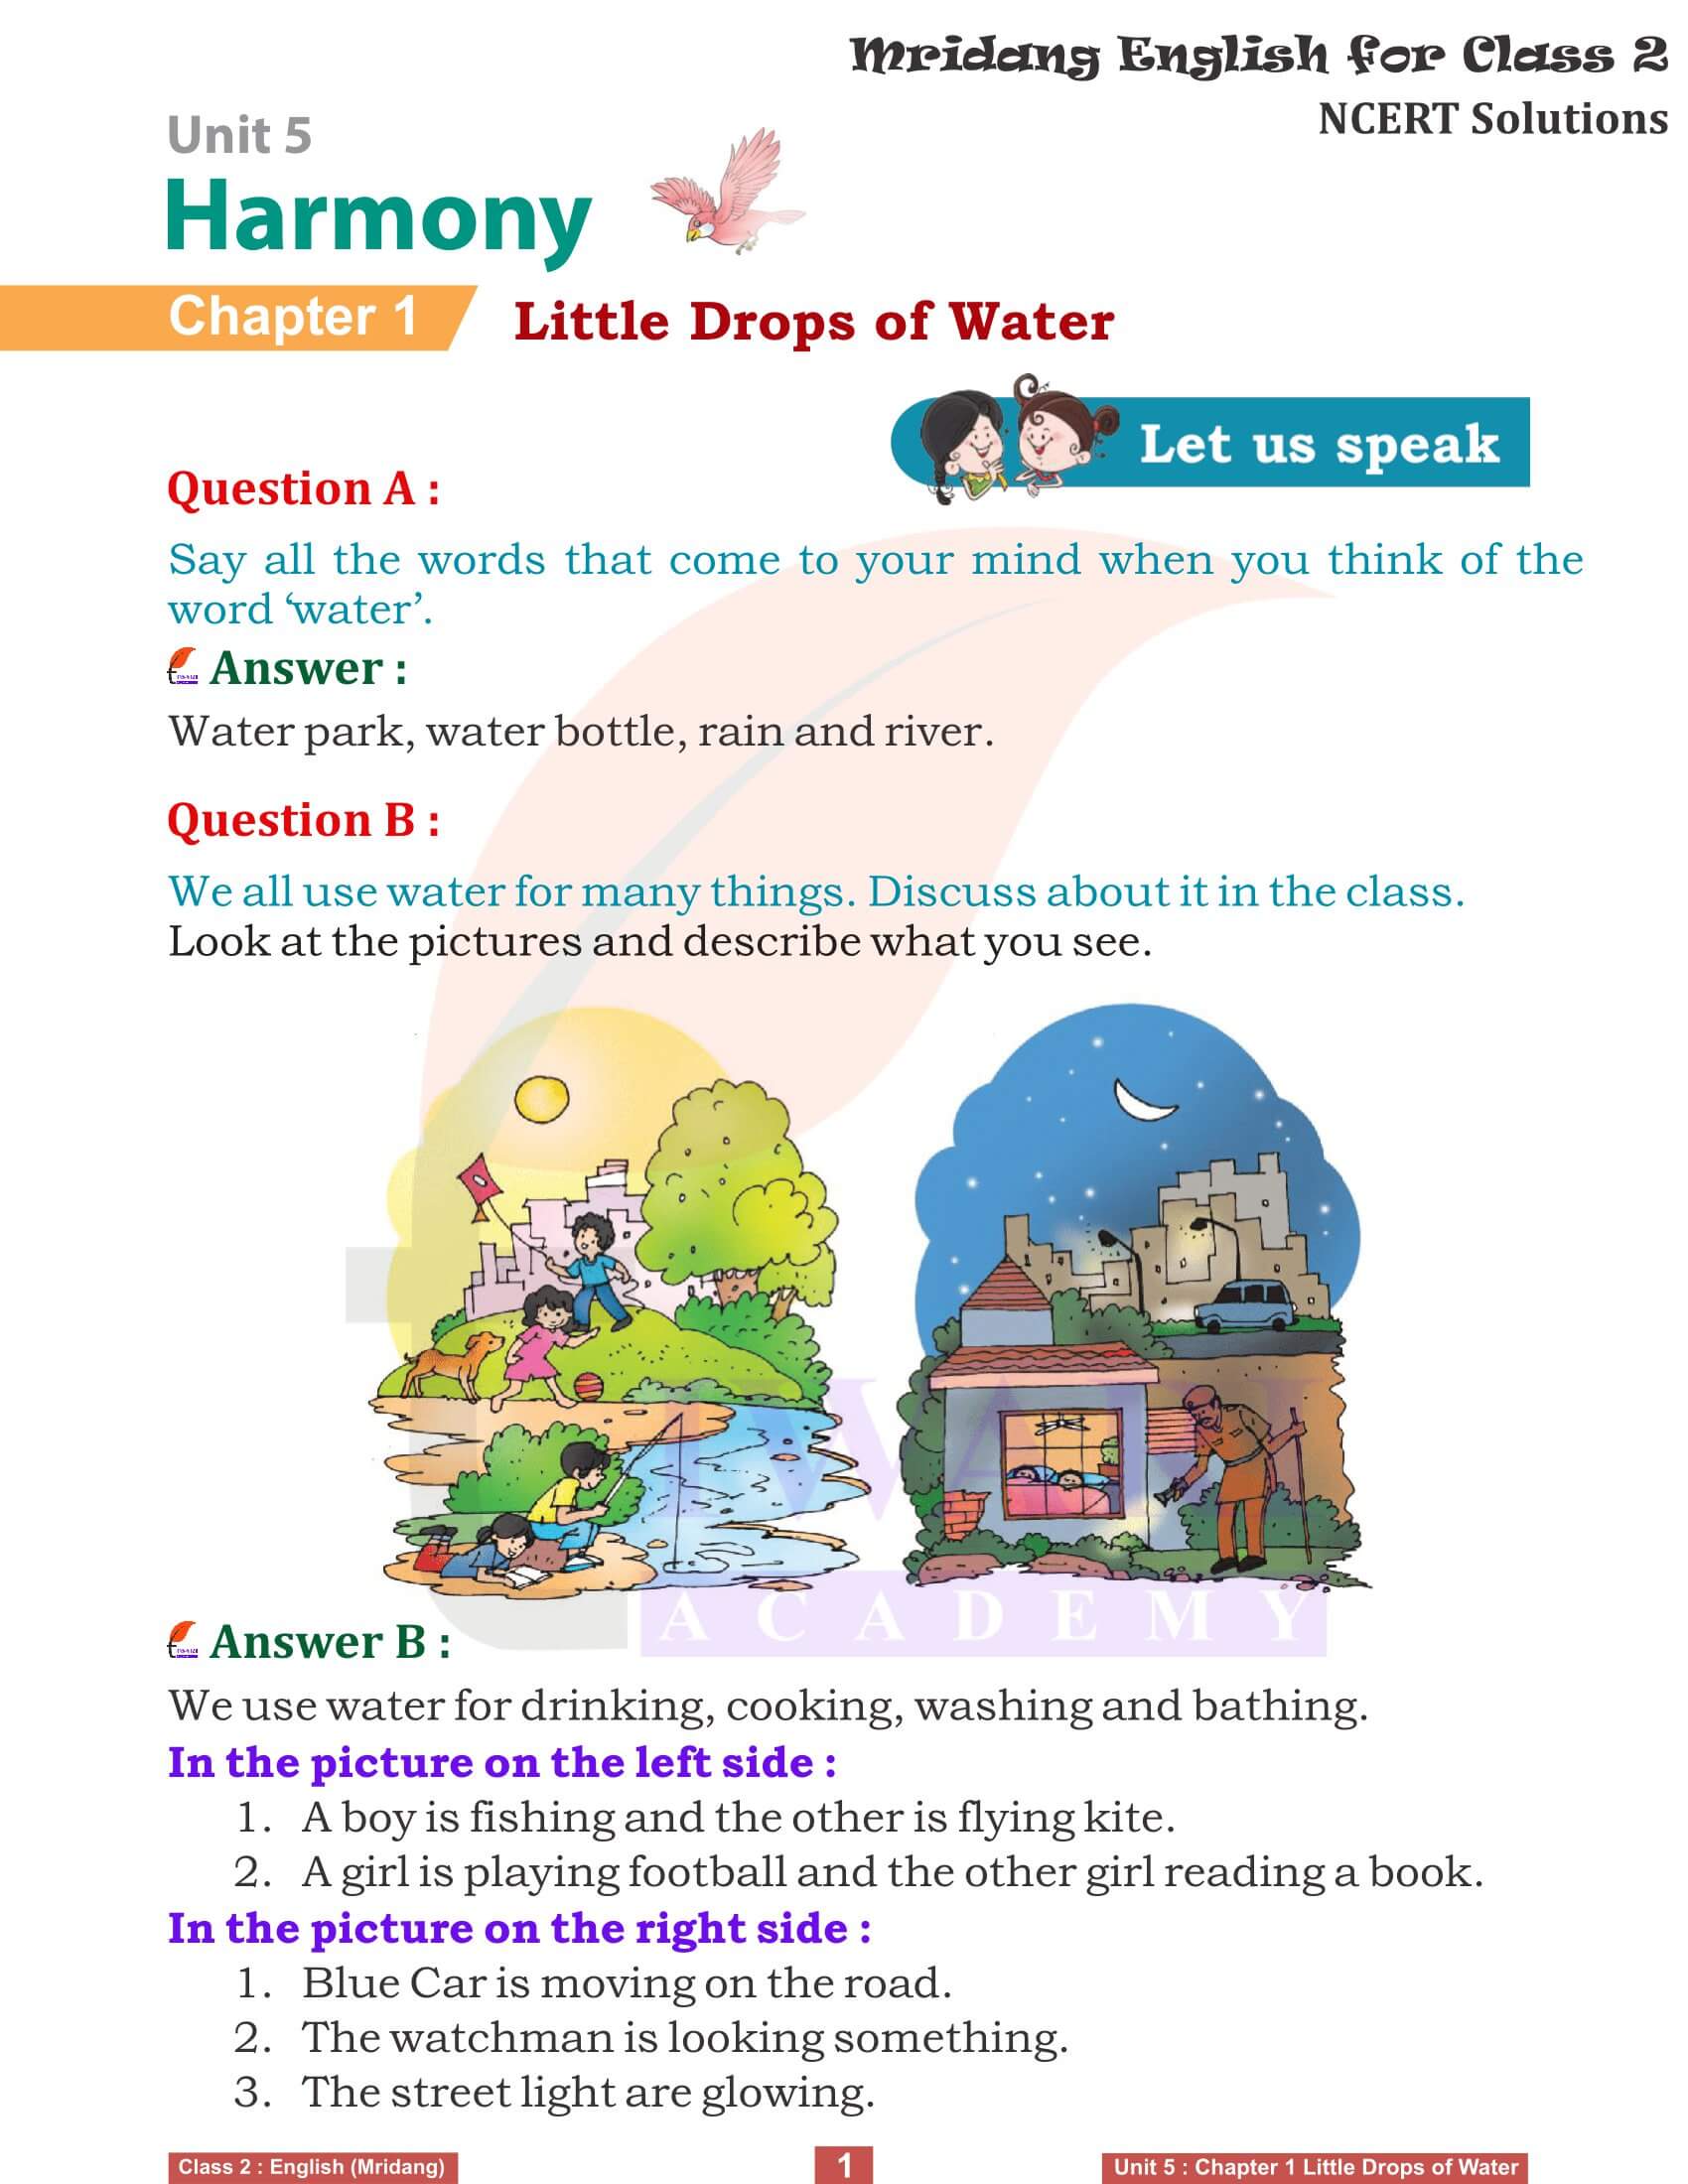 NCERT Solutions for Class 2 English Mridang Unit 5 Harmony Chapter 1 Little Drops of Water